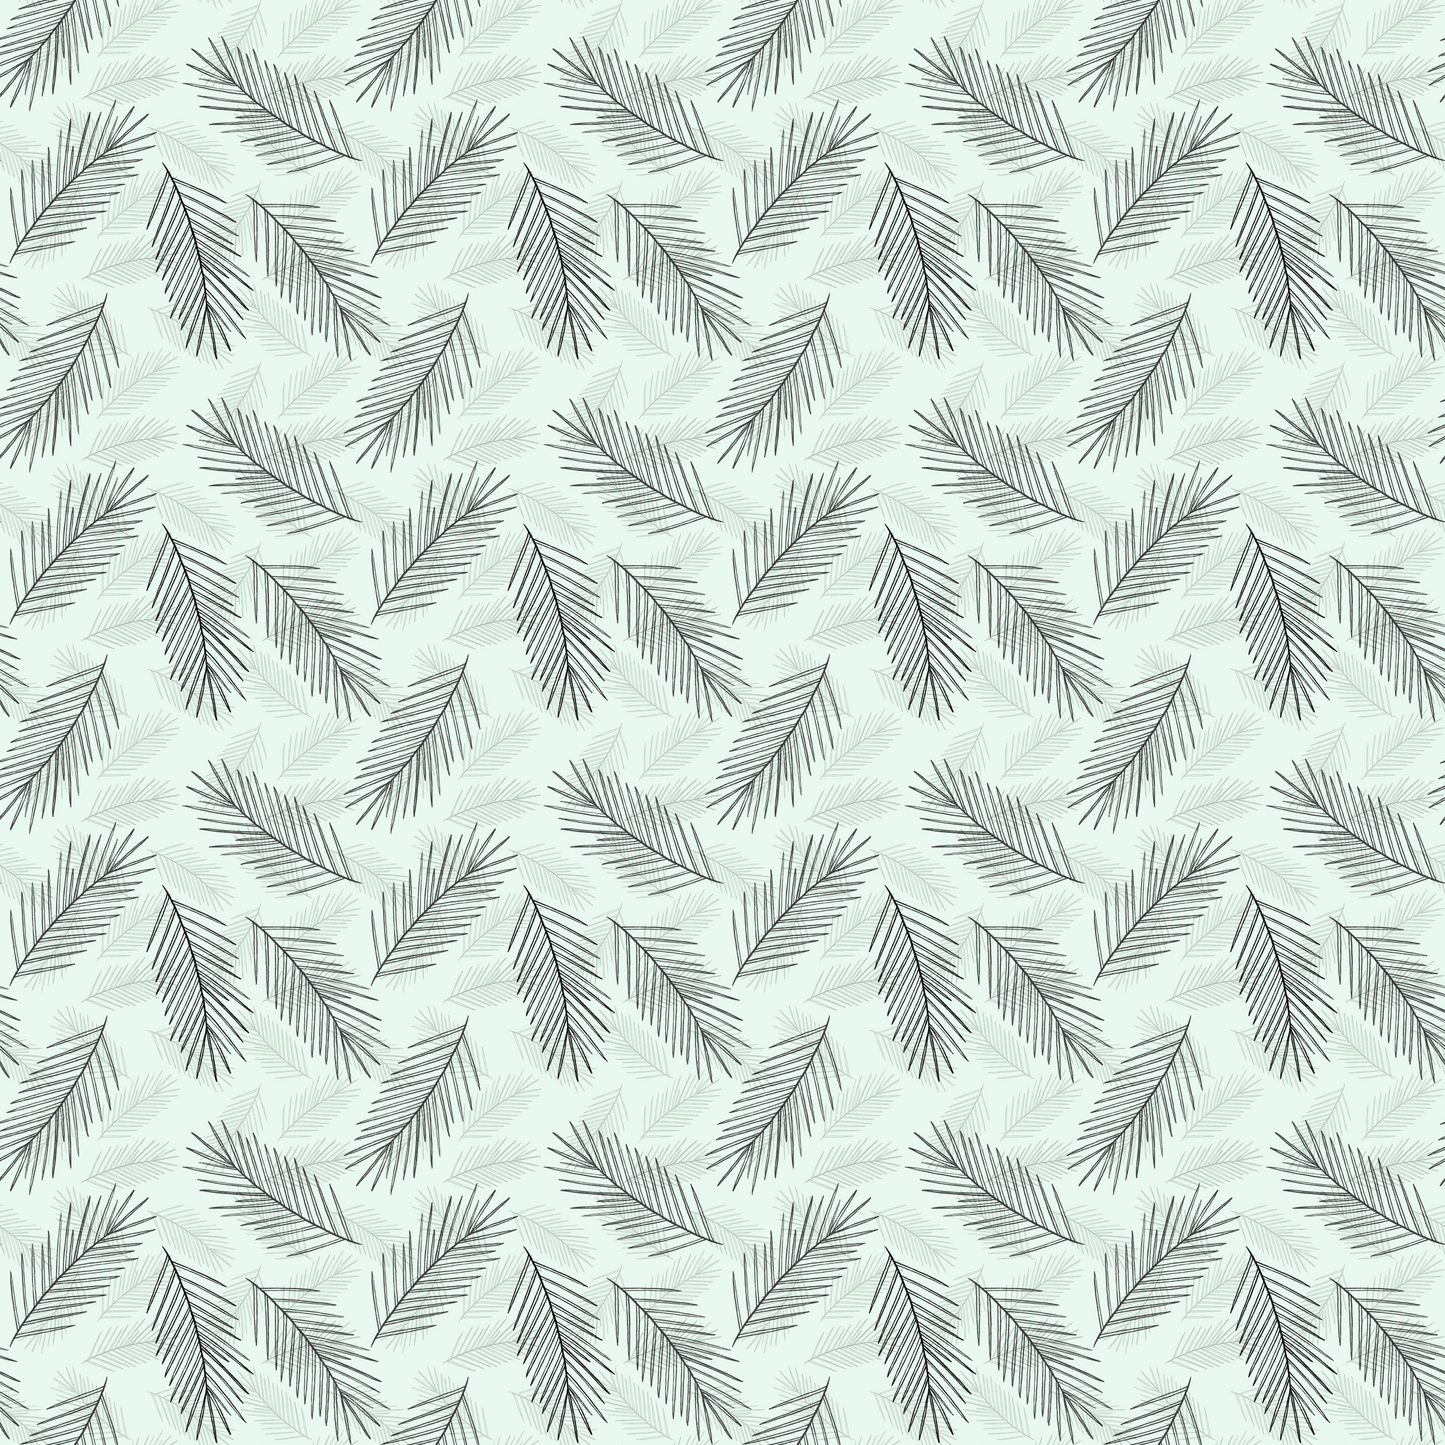 WINTER MINT VINYL - MULTIPLE VARIATIONS - PINE AND FEATHERS DESIGNS